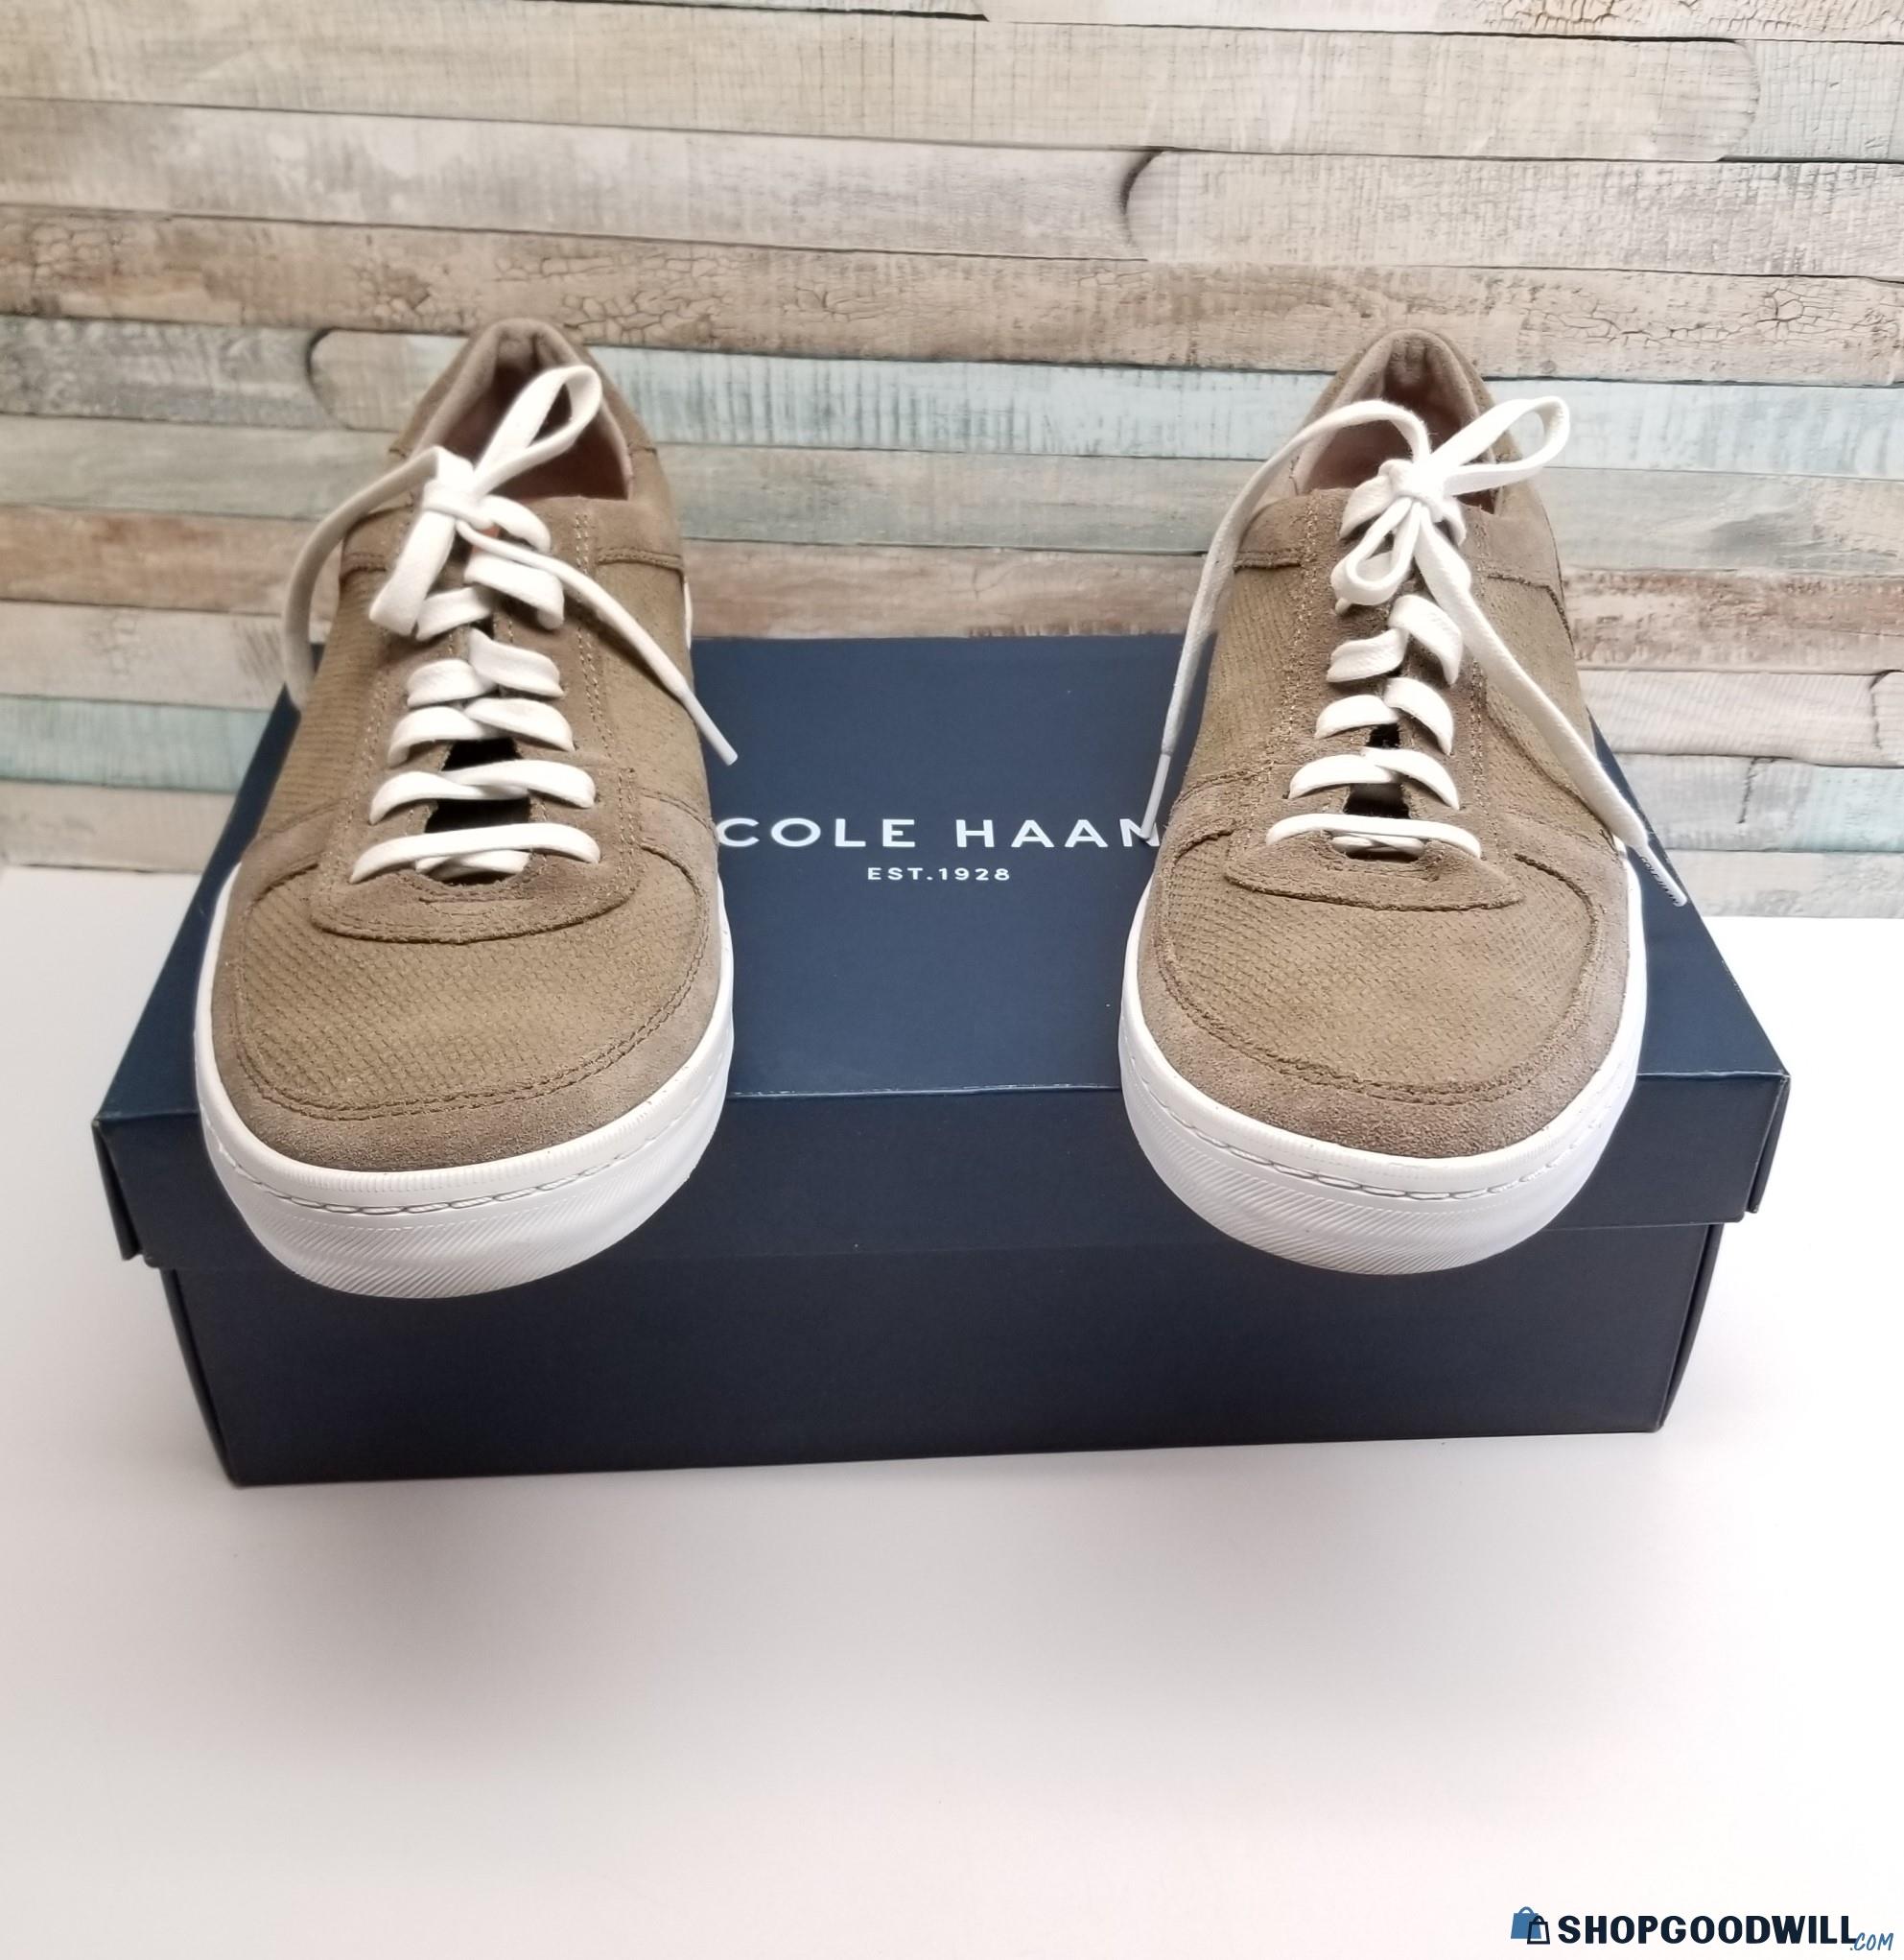 Mens Suede Cole Haan Sneakers sz. 9.5M - shopgoodwill.com